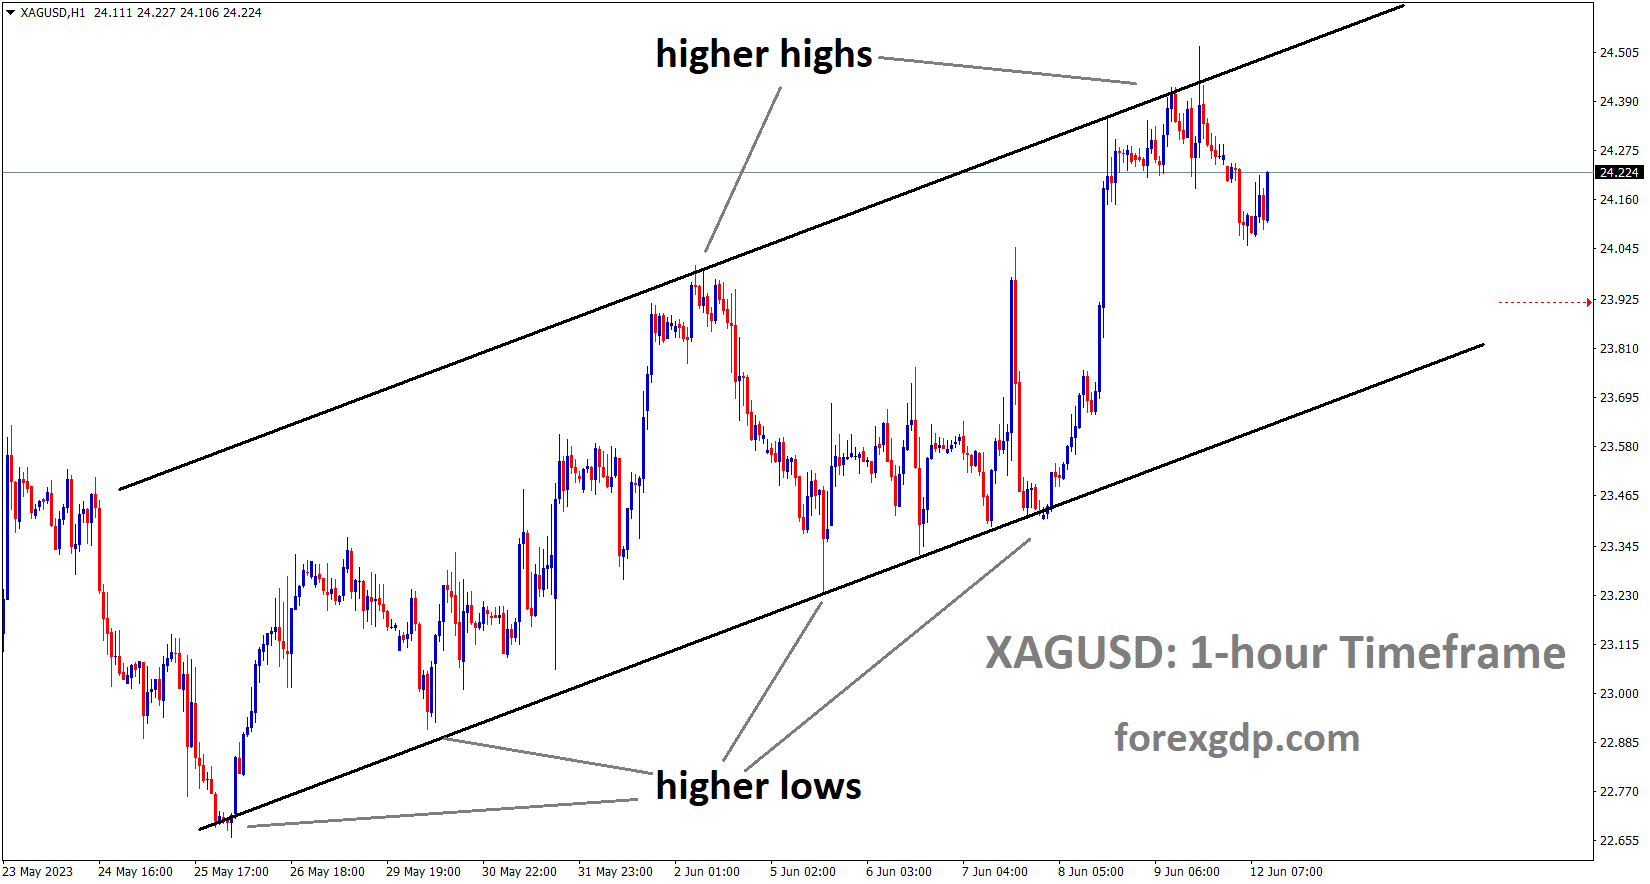 XAGUSD Silver Price is moving in an Ascending channel and the market has fallen from the higher high area of the channel